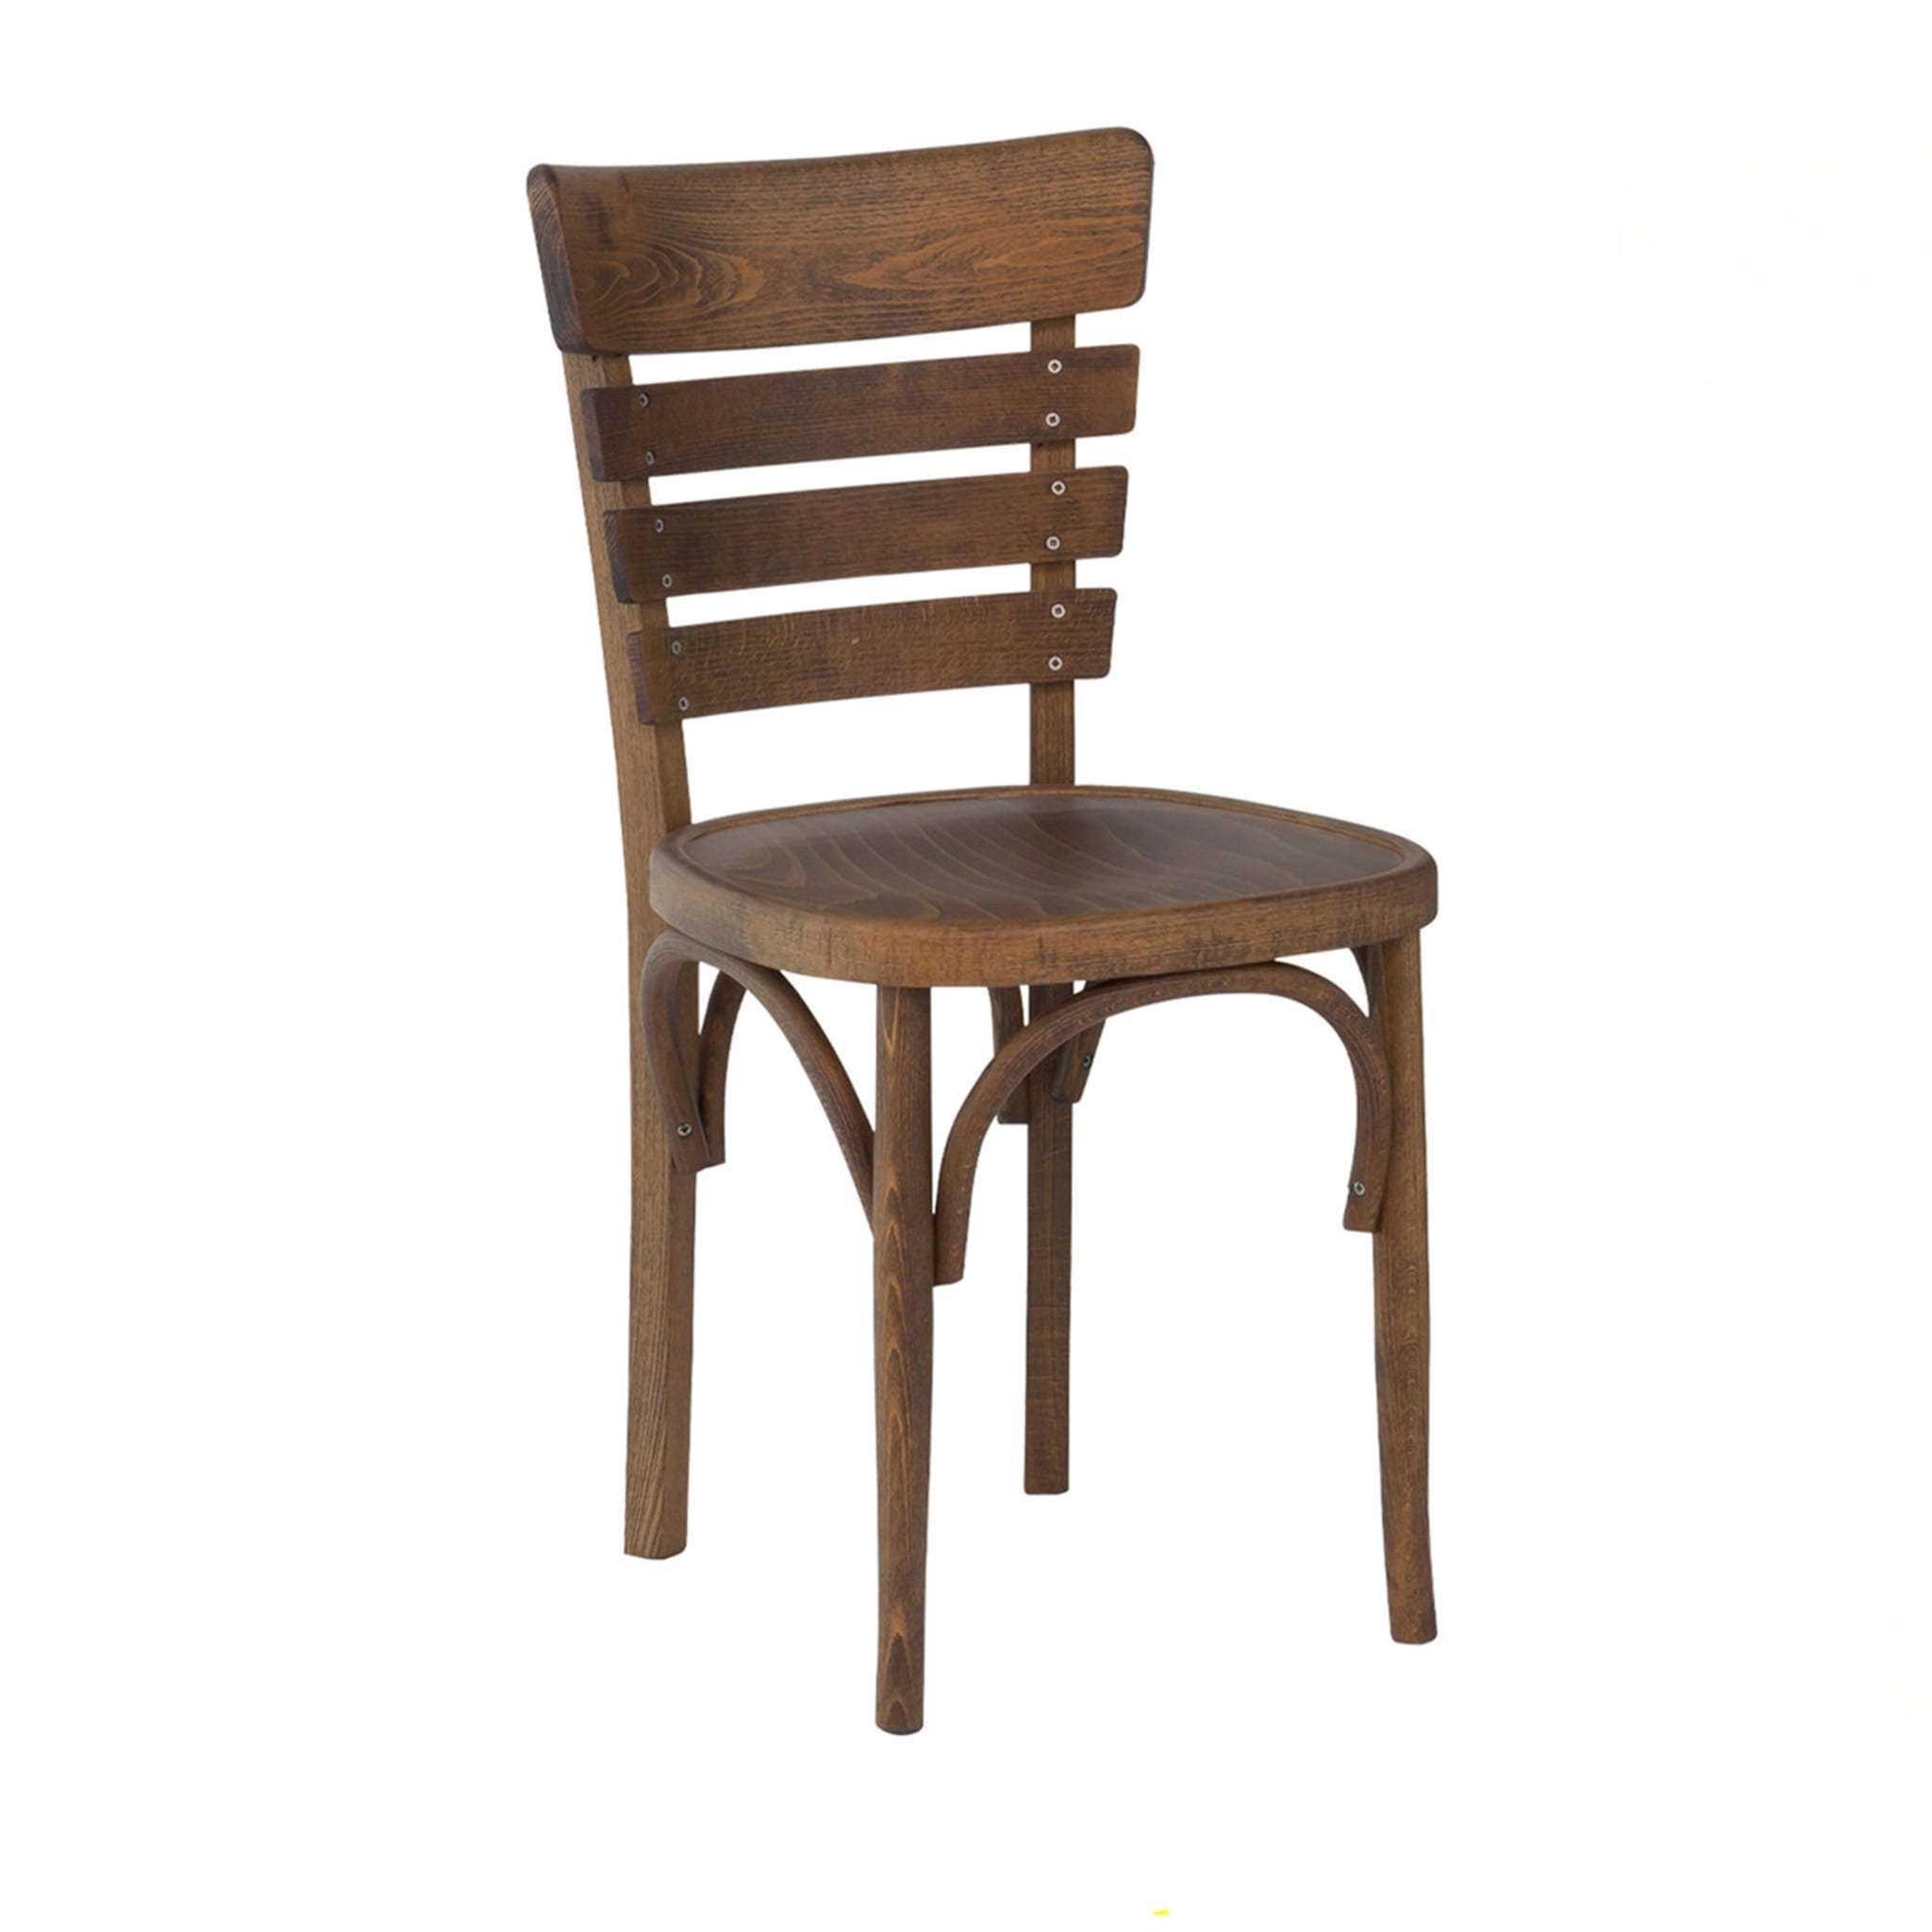 Botte Set of 2 Chairs - Main view